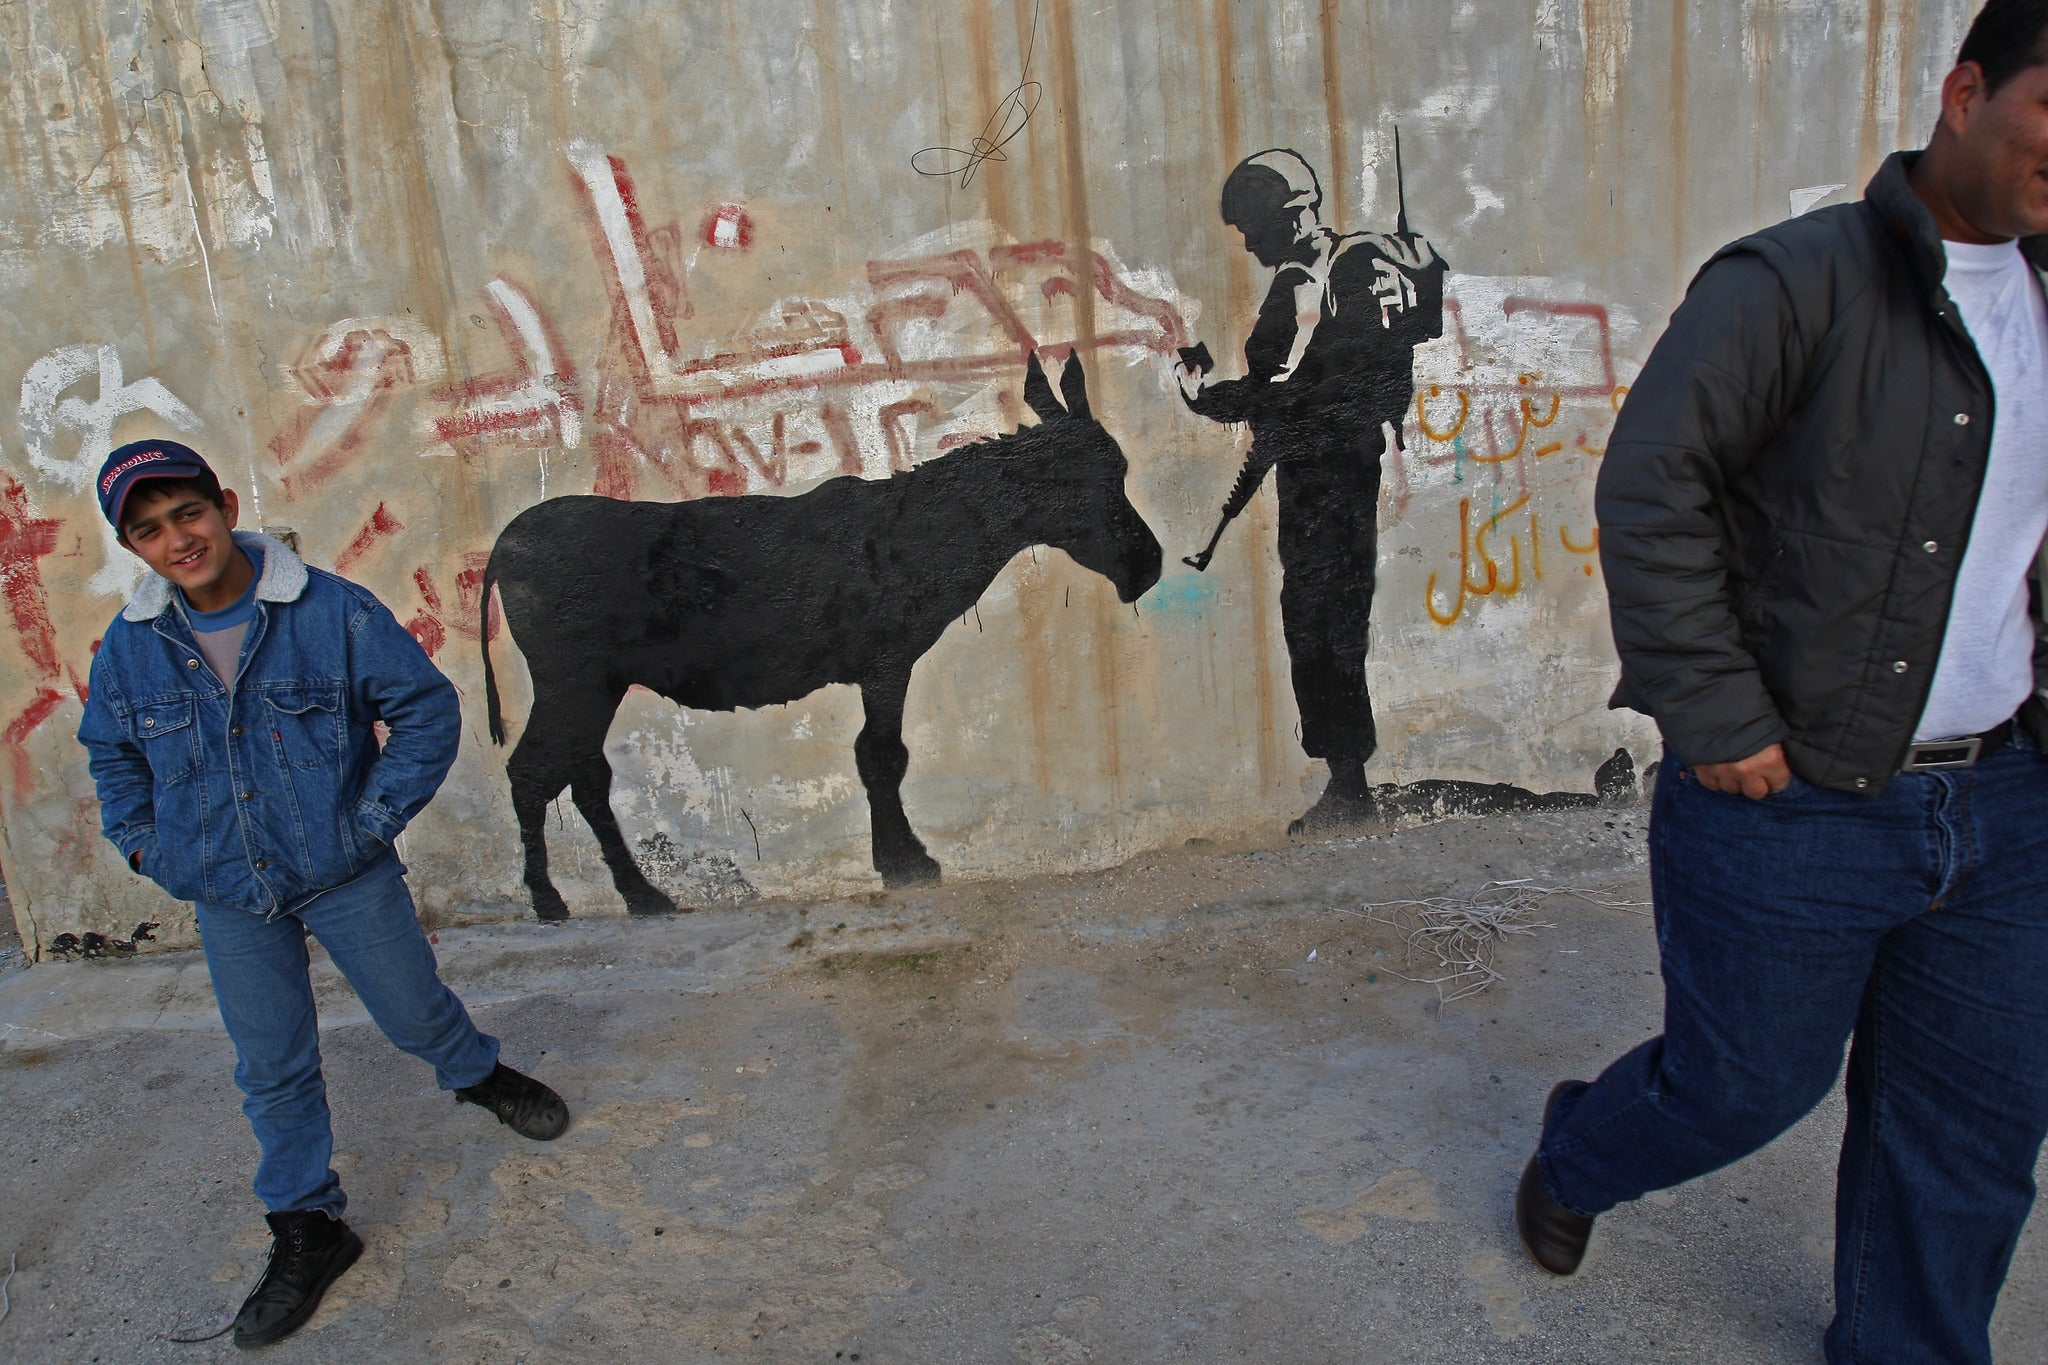 Banksy's Donkey Documents (2007) is expected to sell for $600,000 at auction